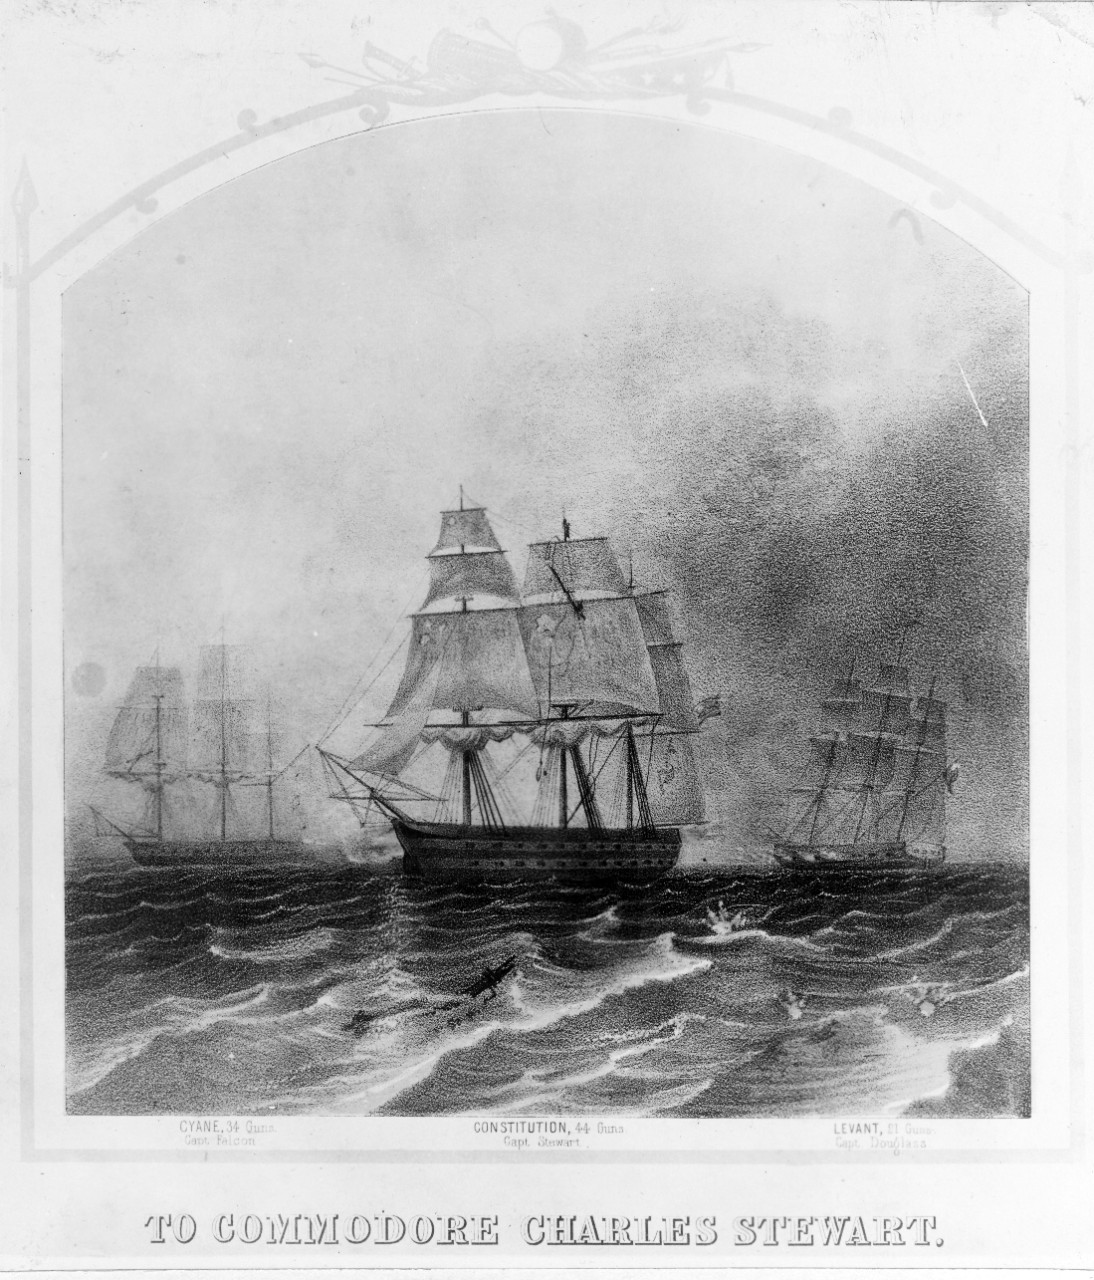 Battle Between the U.S. Frigate CONSTITUTION and British Ships CYANE and LEVANT, February 20, 1815. 